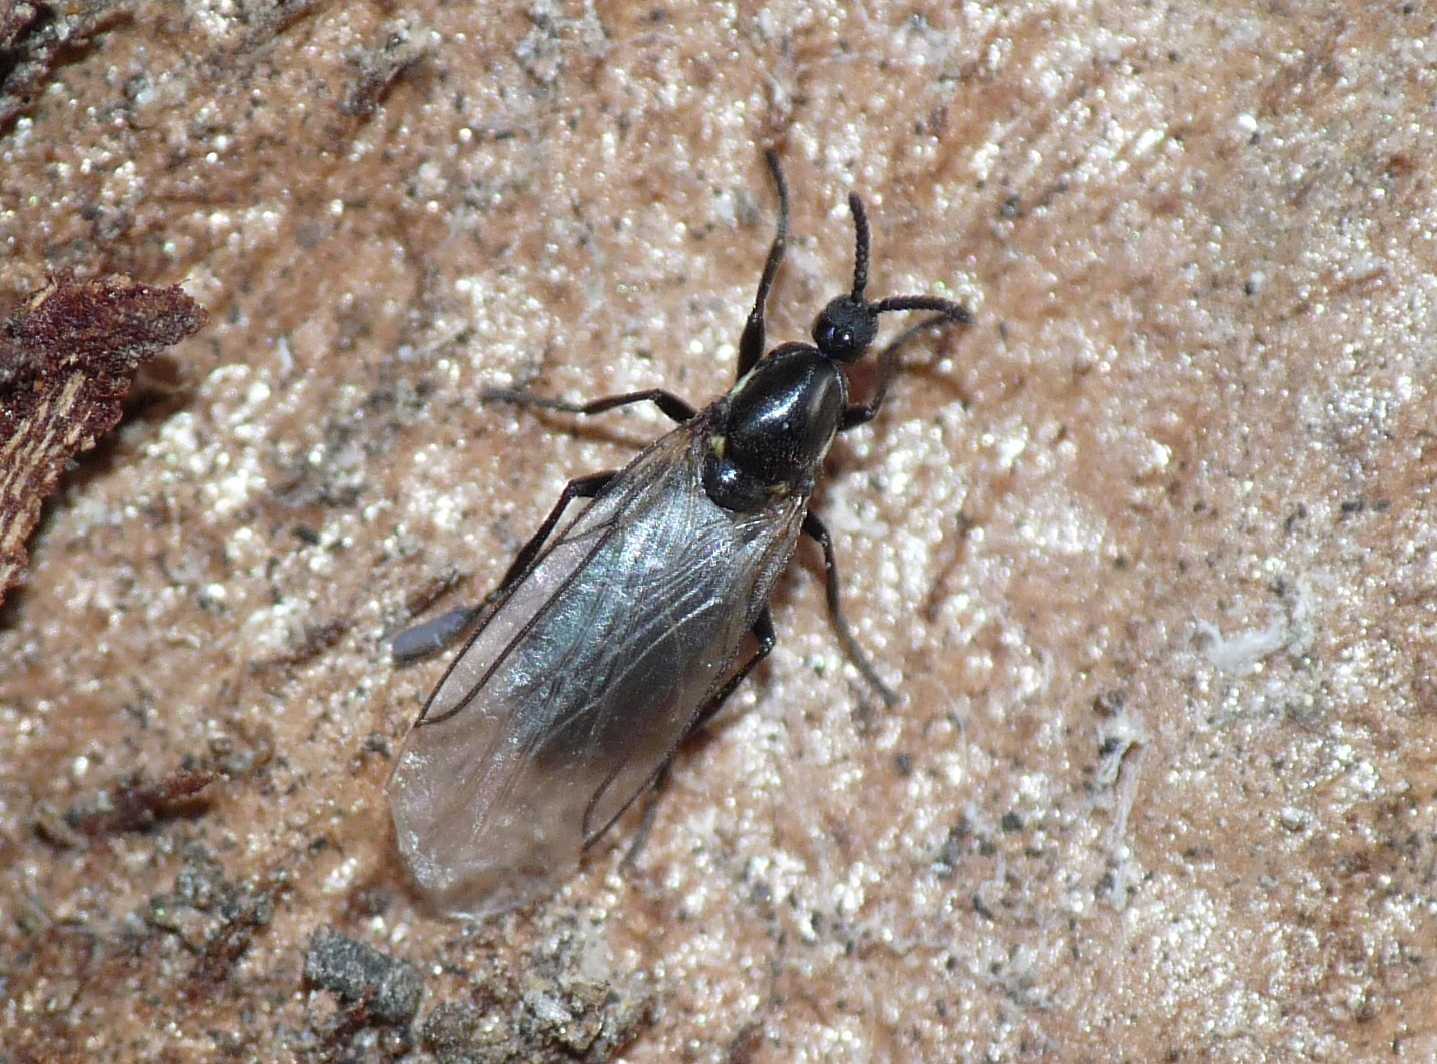 Dittero minuscolo: Scatopsidae: Scatopse notata (cfr.)